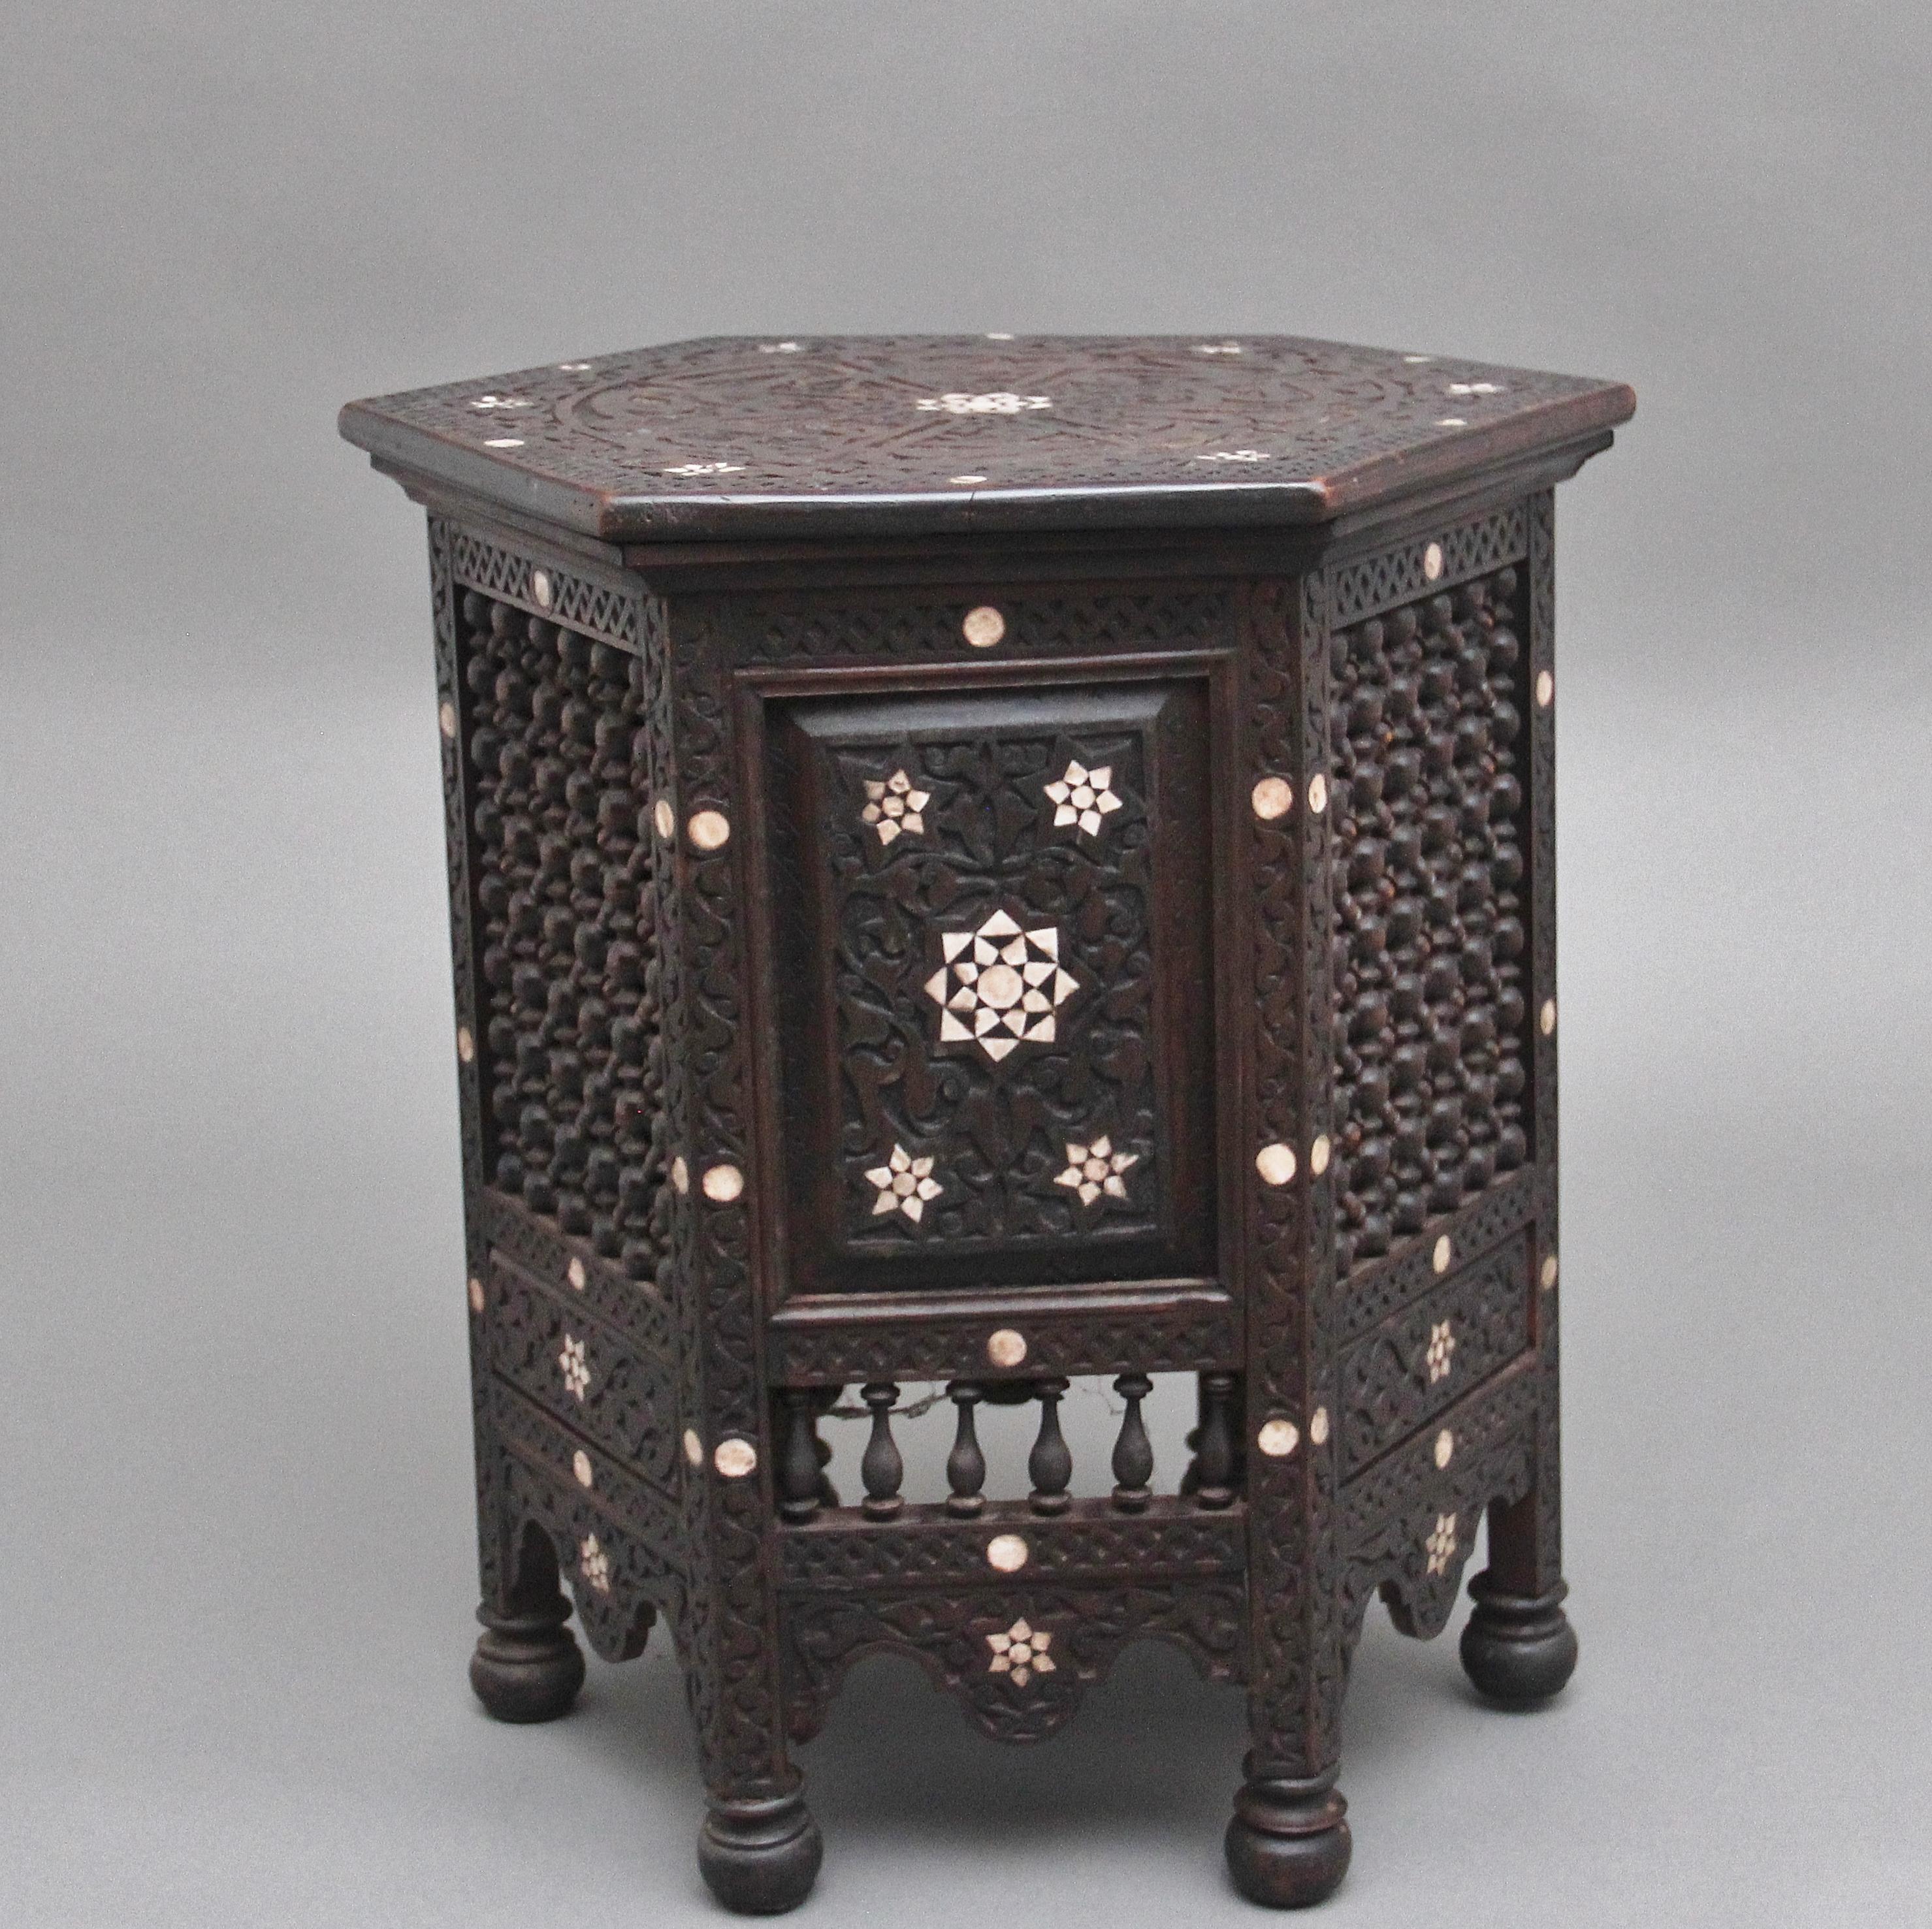 A highly decorative 19th Century Moorish occasional / side table, the hexagon shaped top with carved Moorish design with various star decoration, each side of the table is in keeping with the Moorish style of the top but incorporating various